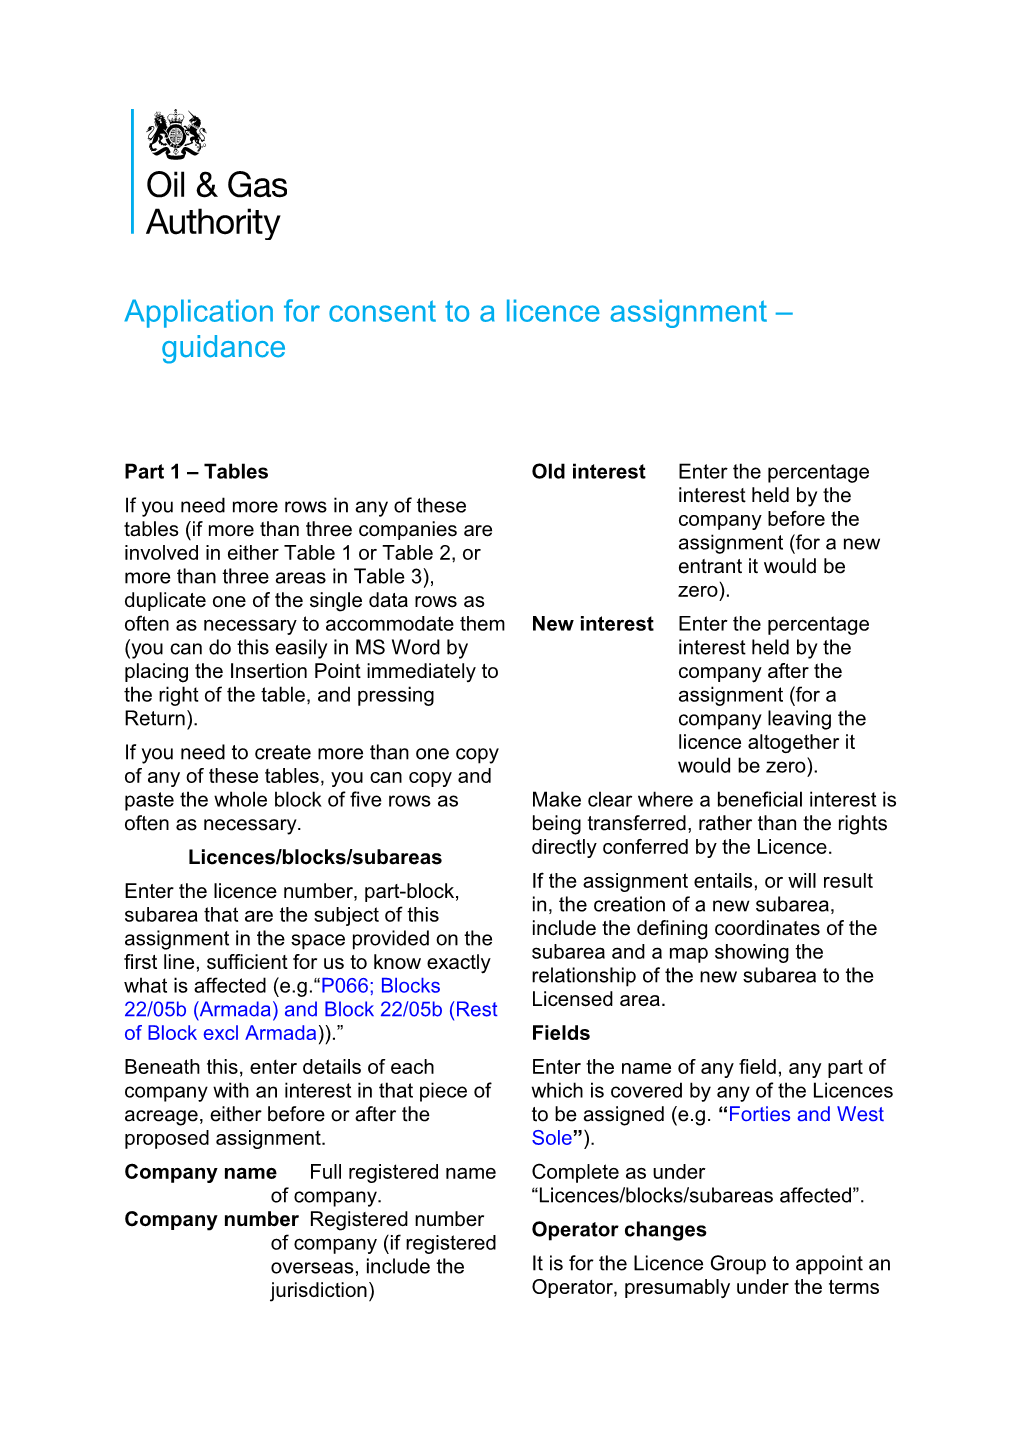 Application for Consent to a Licence Assignment Guidance